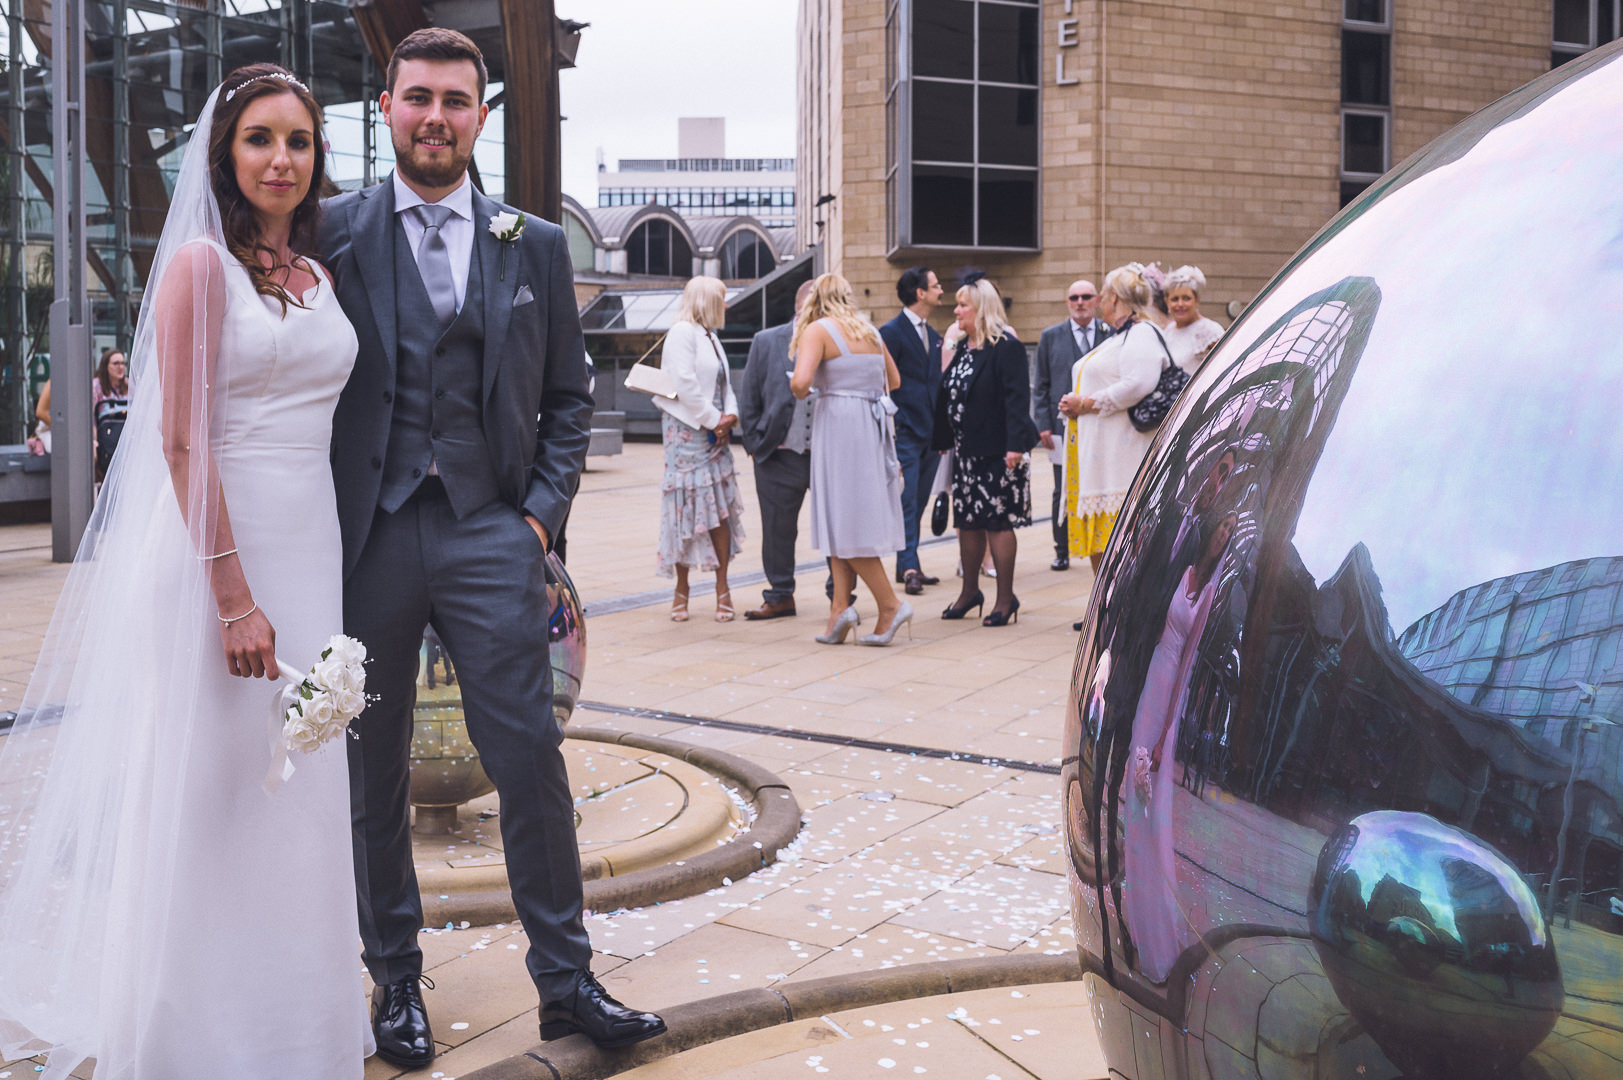 The bride and groom are standing by a large metal ball outside the Winter Gardens